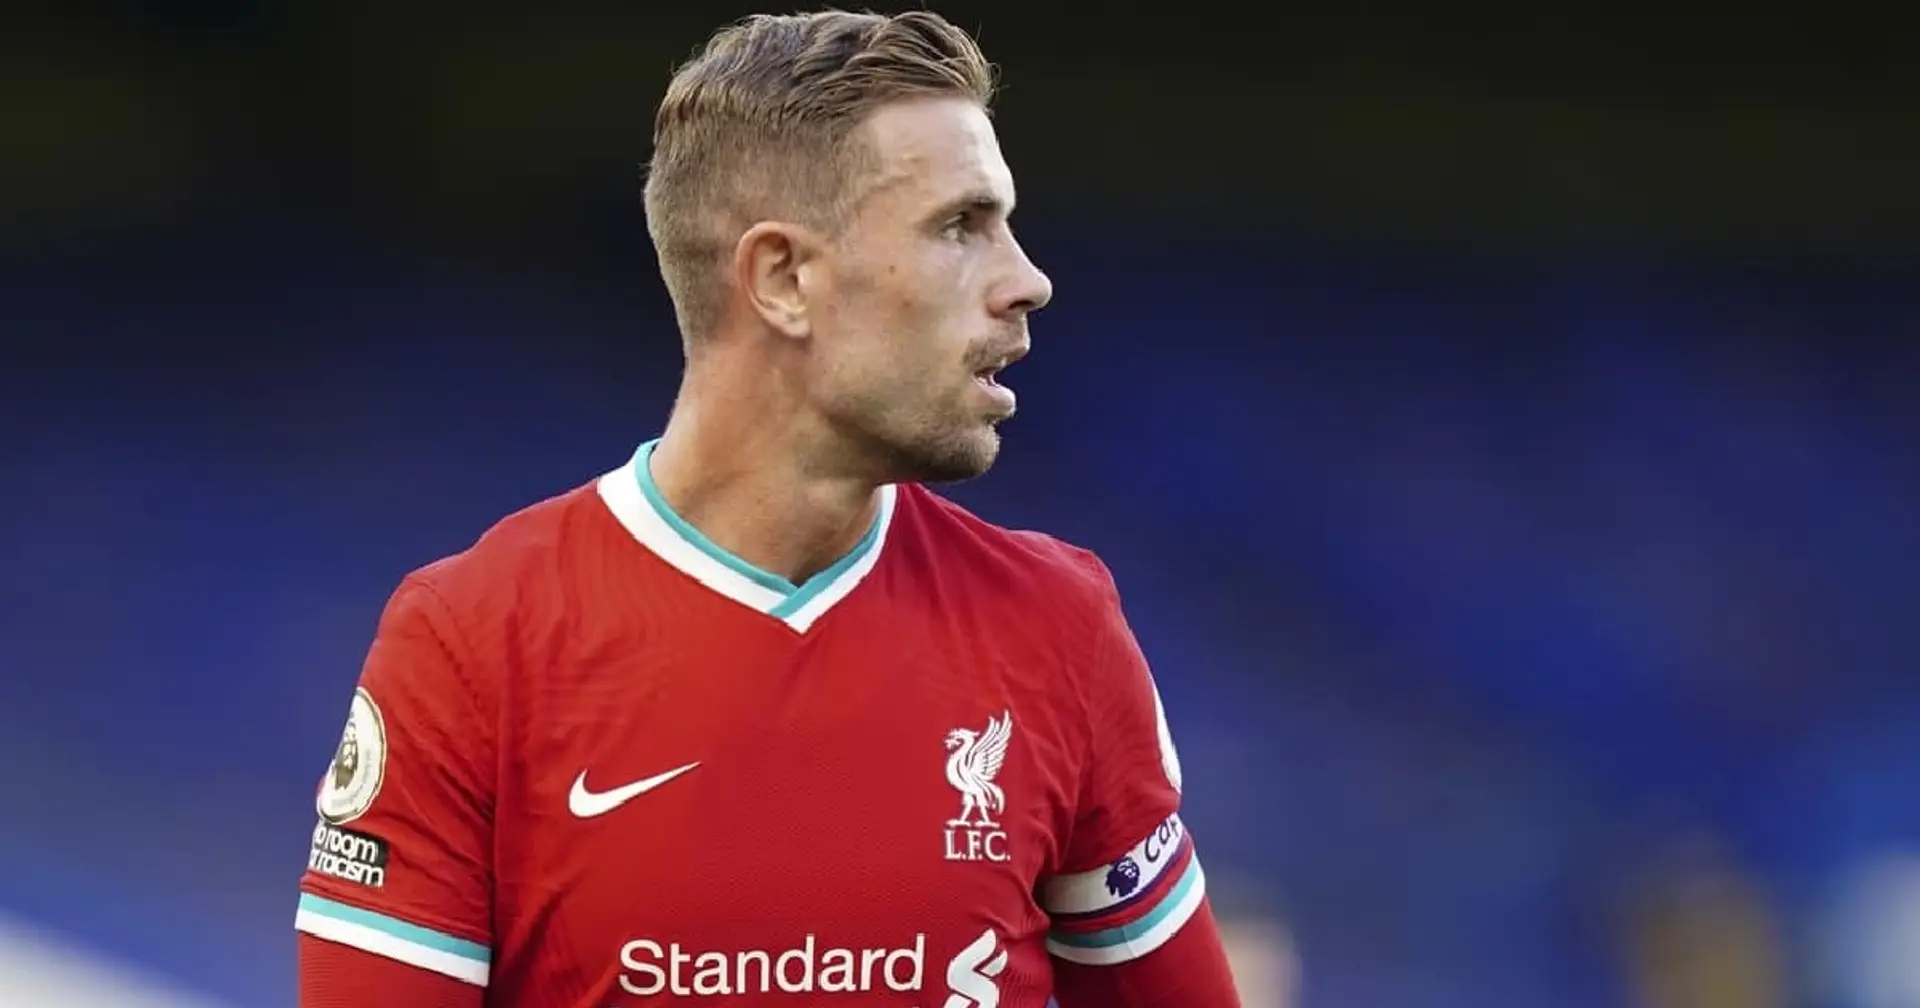 3 key passes, 7 long balls and more: Henderson's dominant stats from Wolves clash